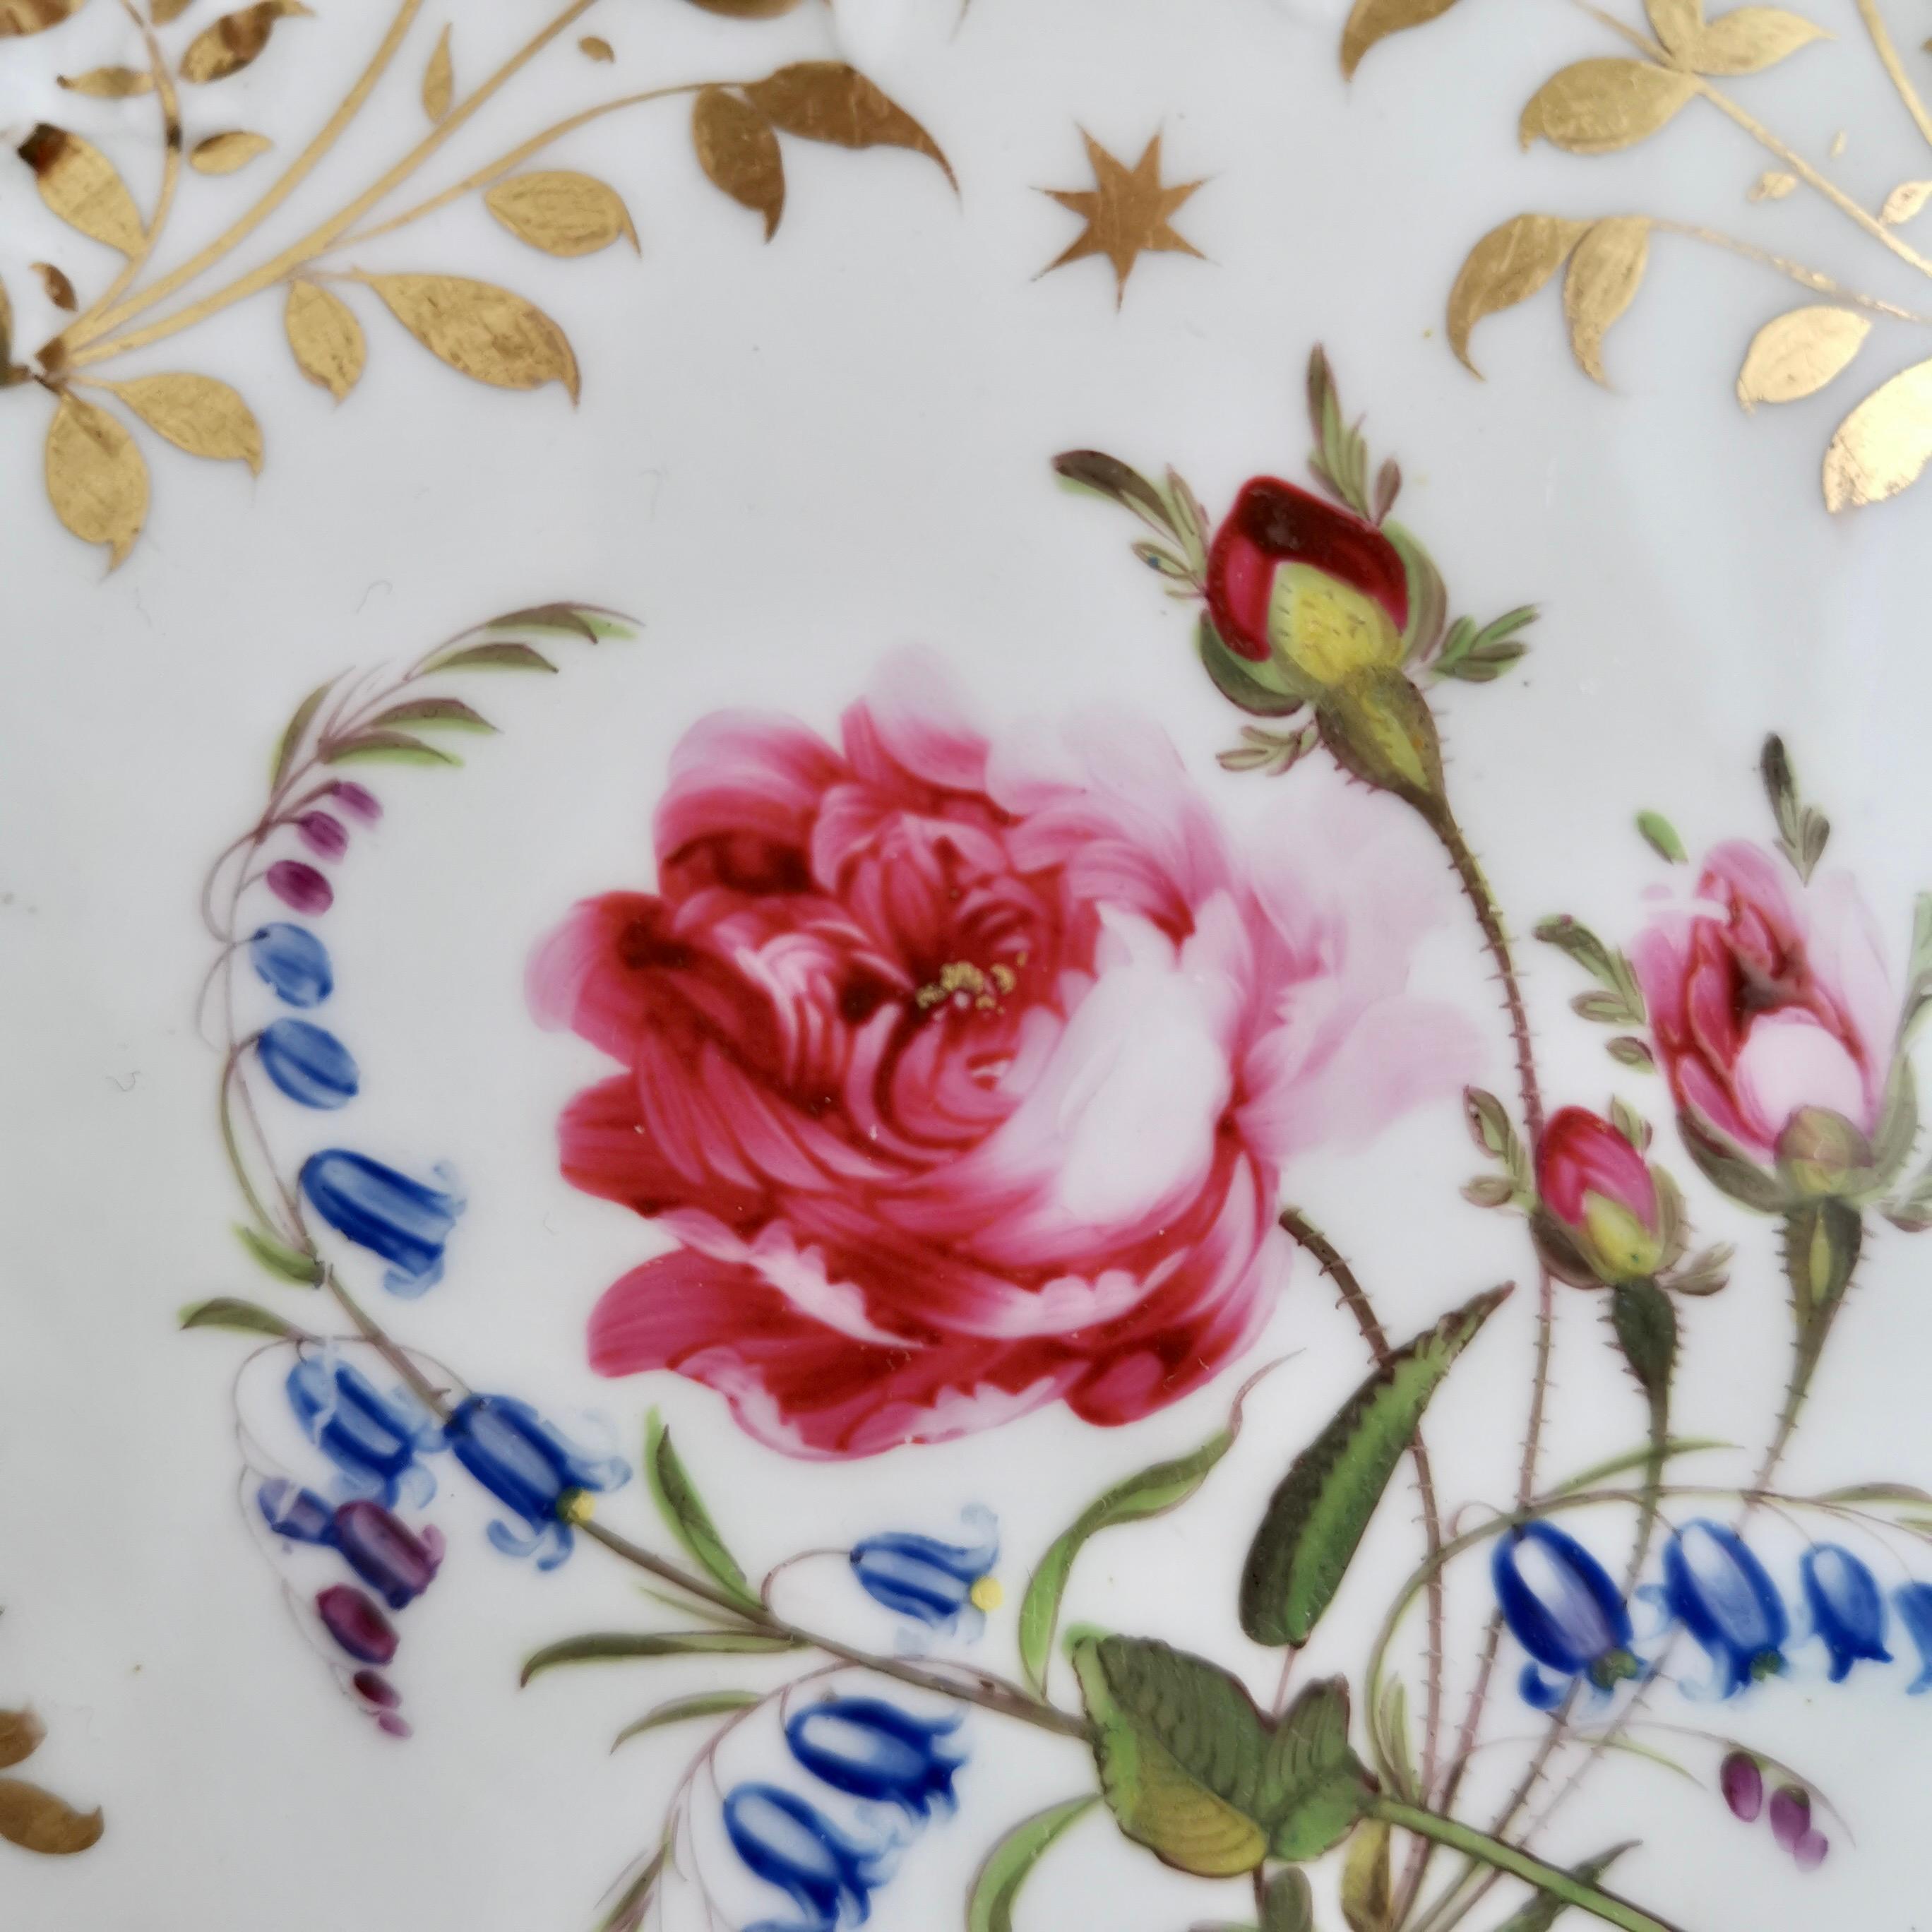 Hand-Painted Staffordshire Porcelain Plate, Honeycomb Moulding, Beige, Pink Roses, ca 1820